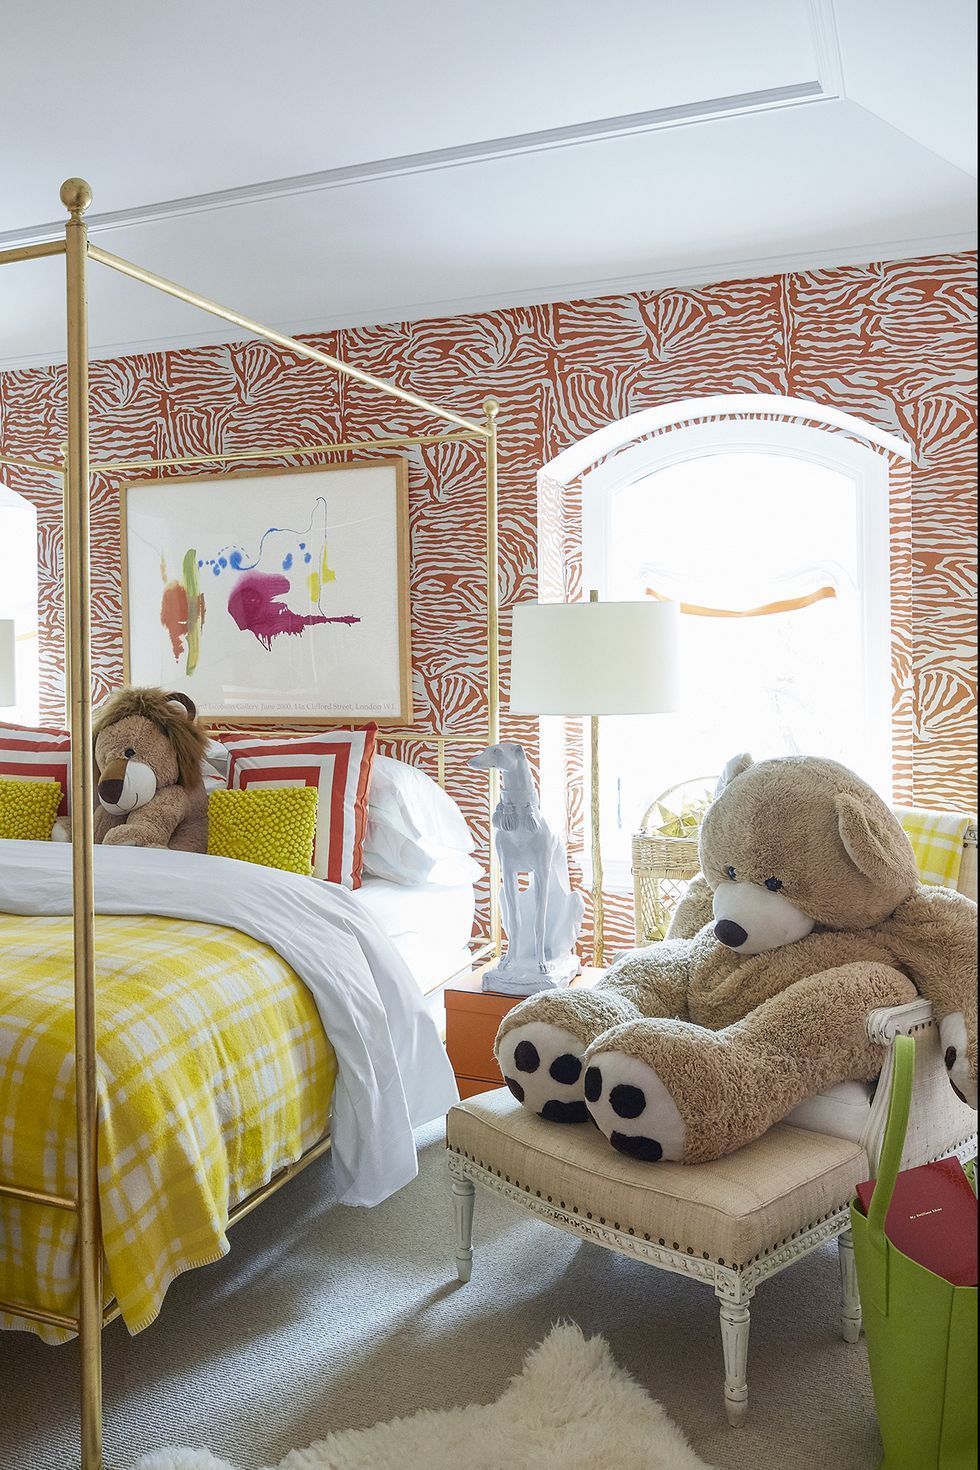 a couple of teddy bears sit on a chair in a bedroom